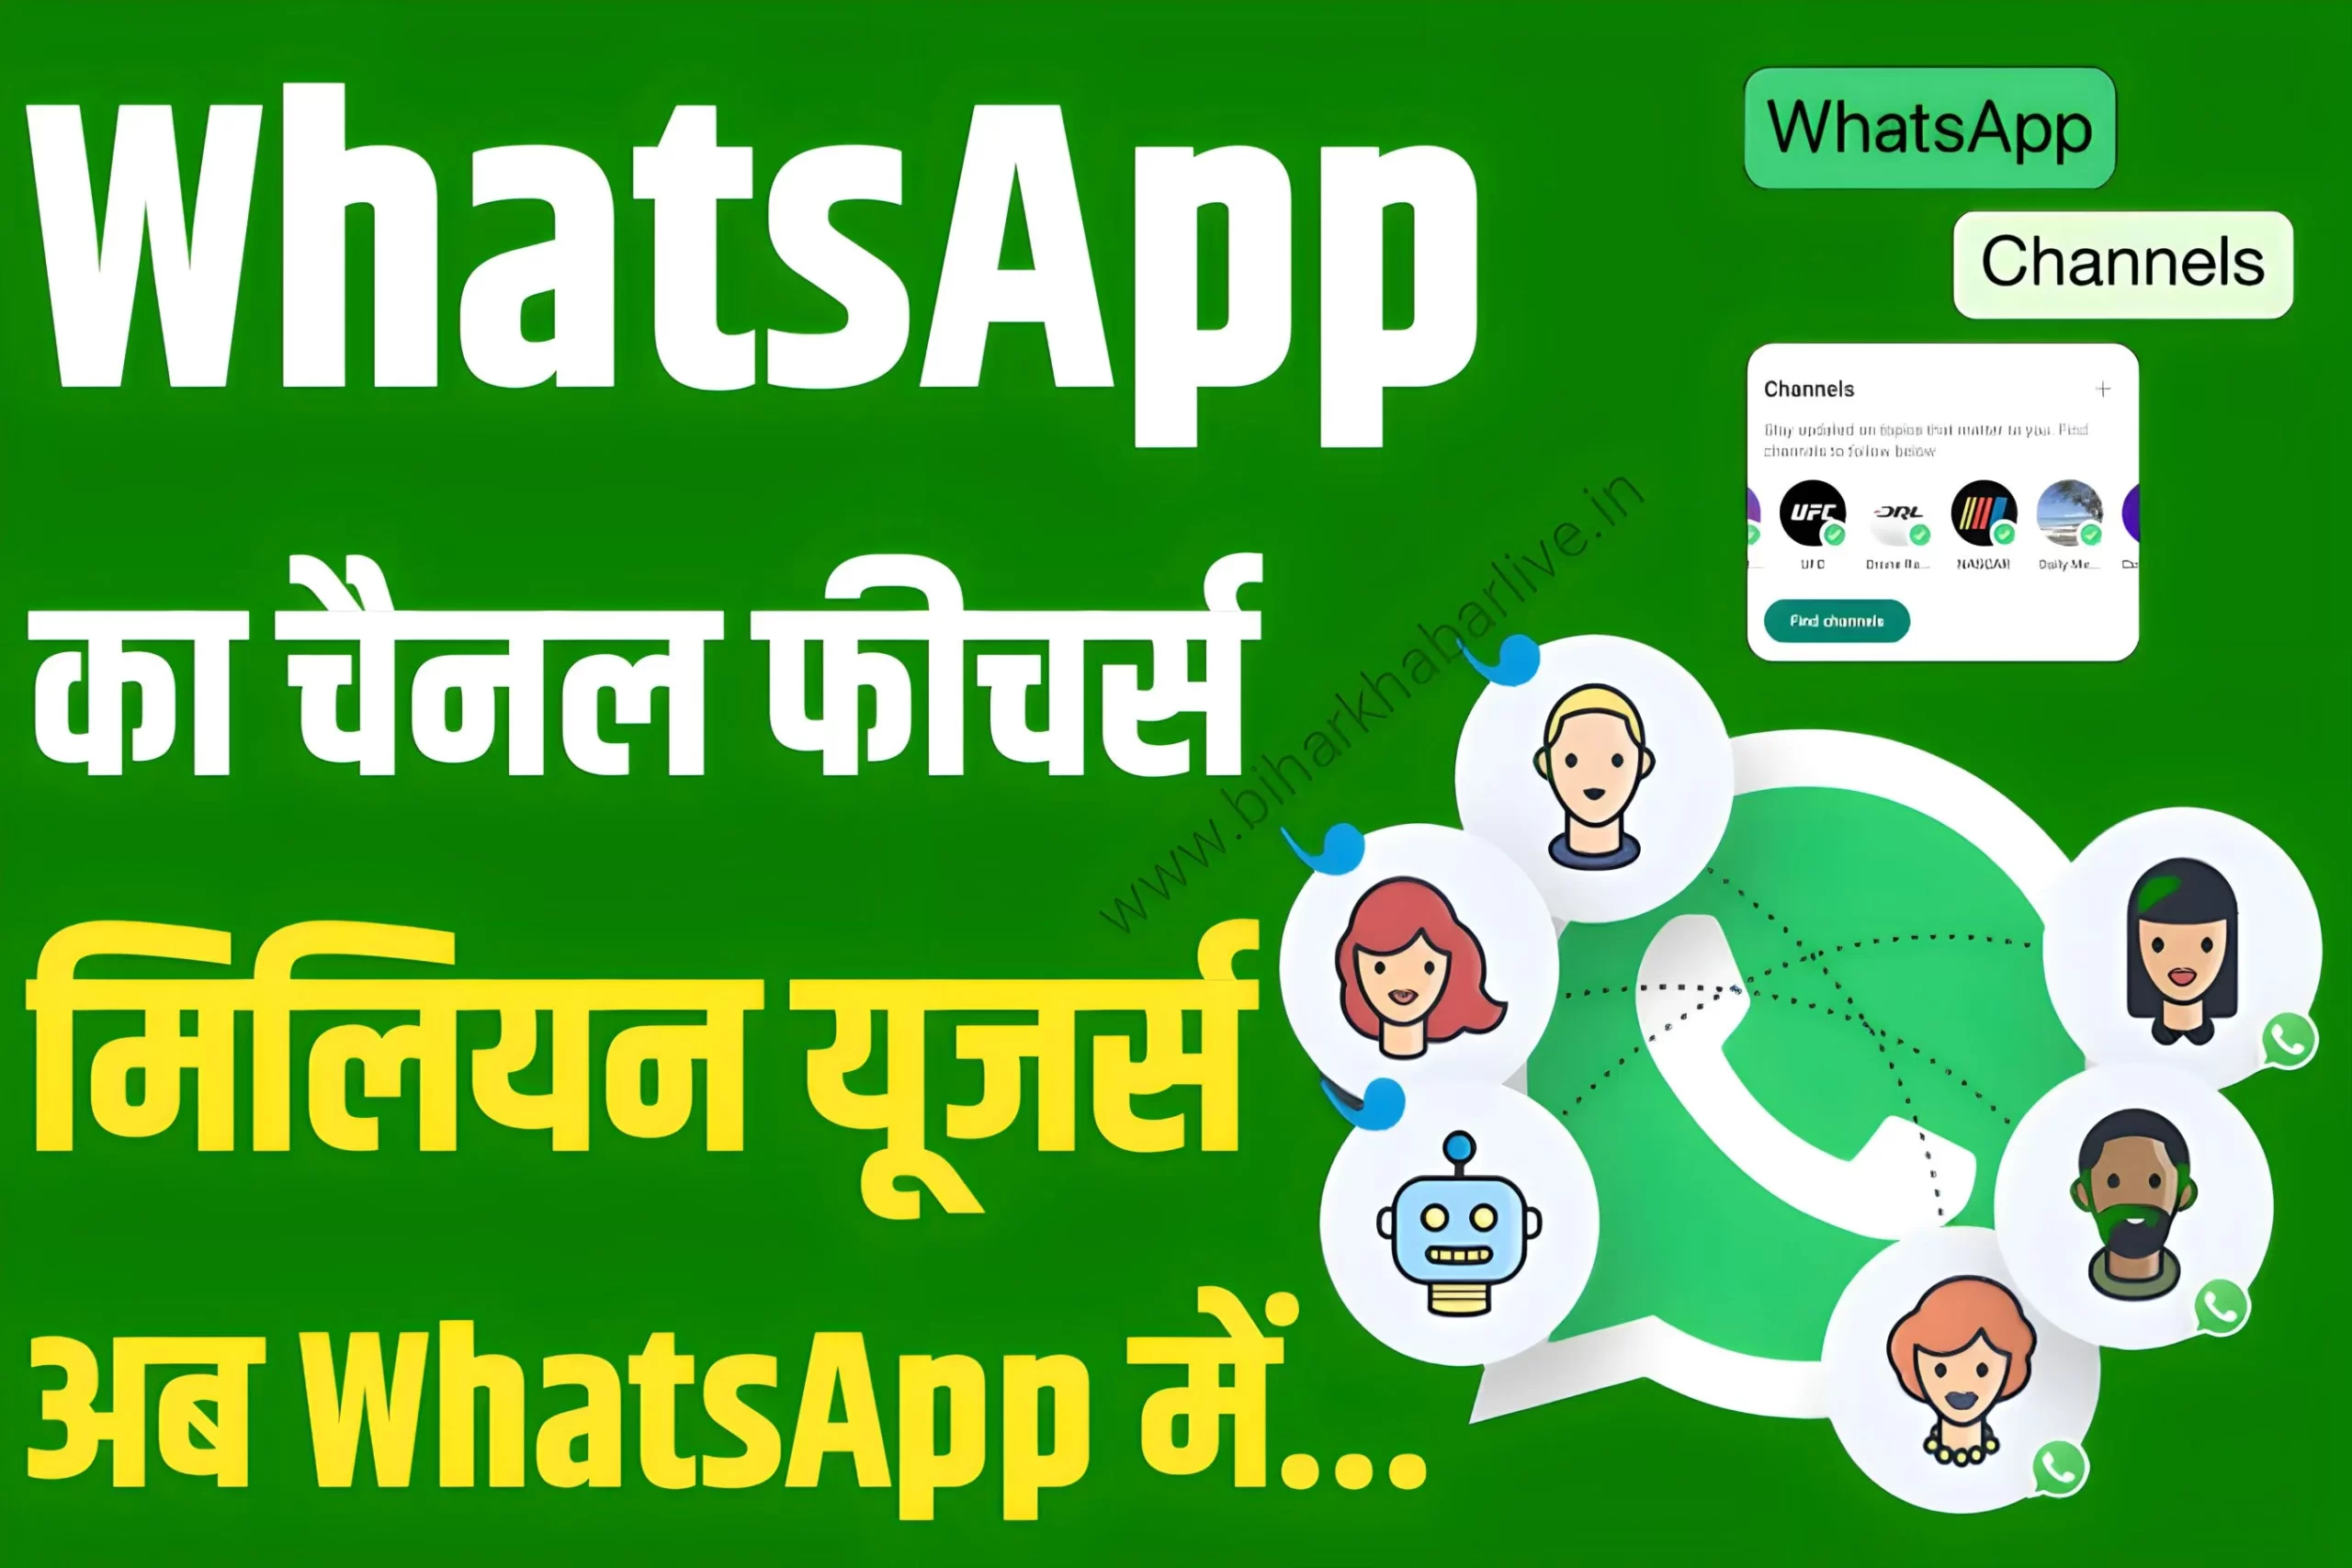 Whatsapp Channel Features